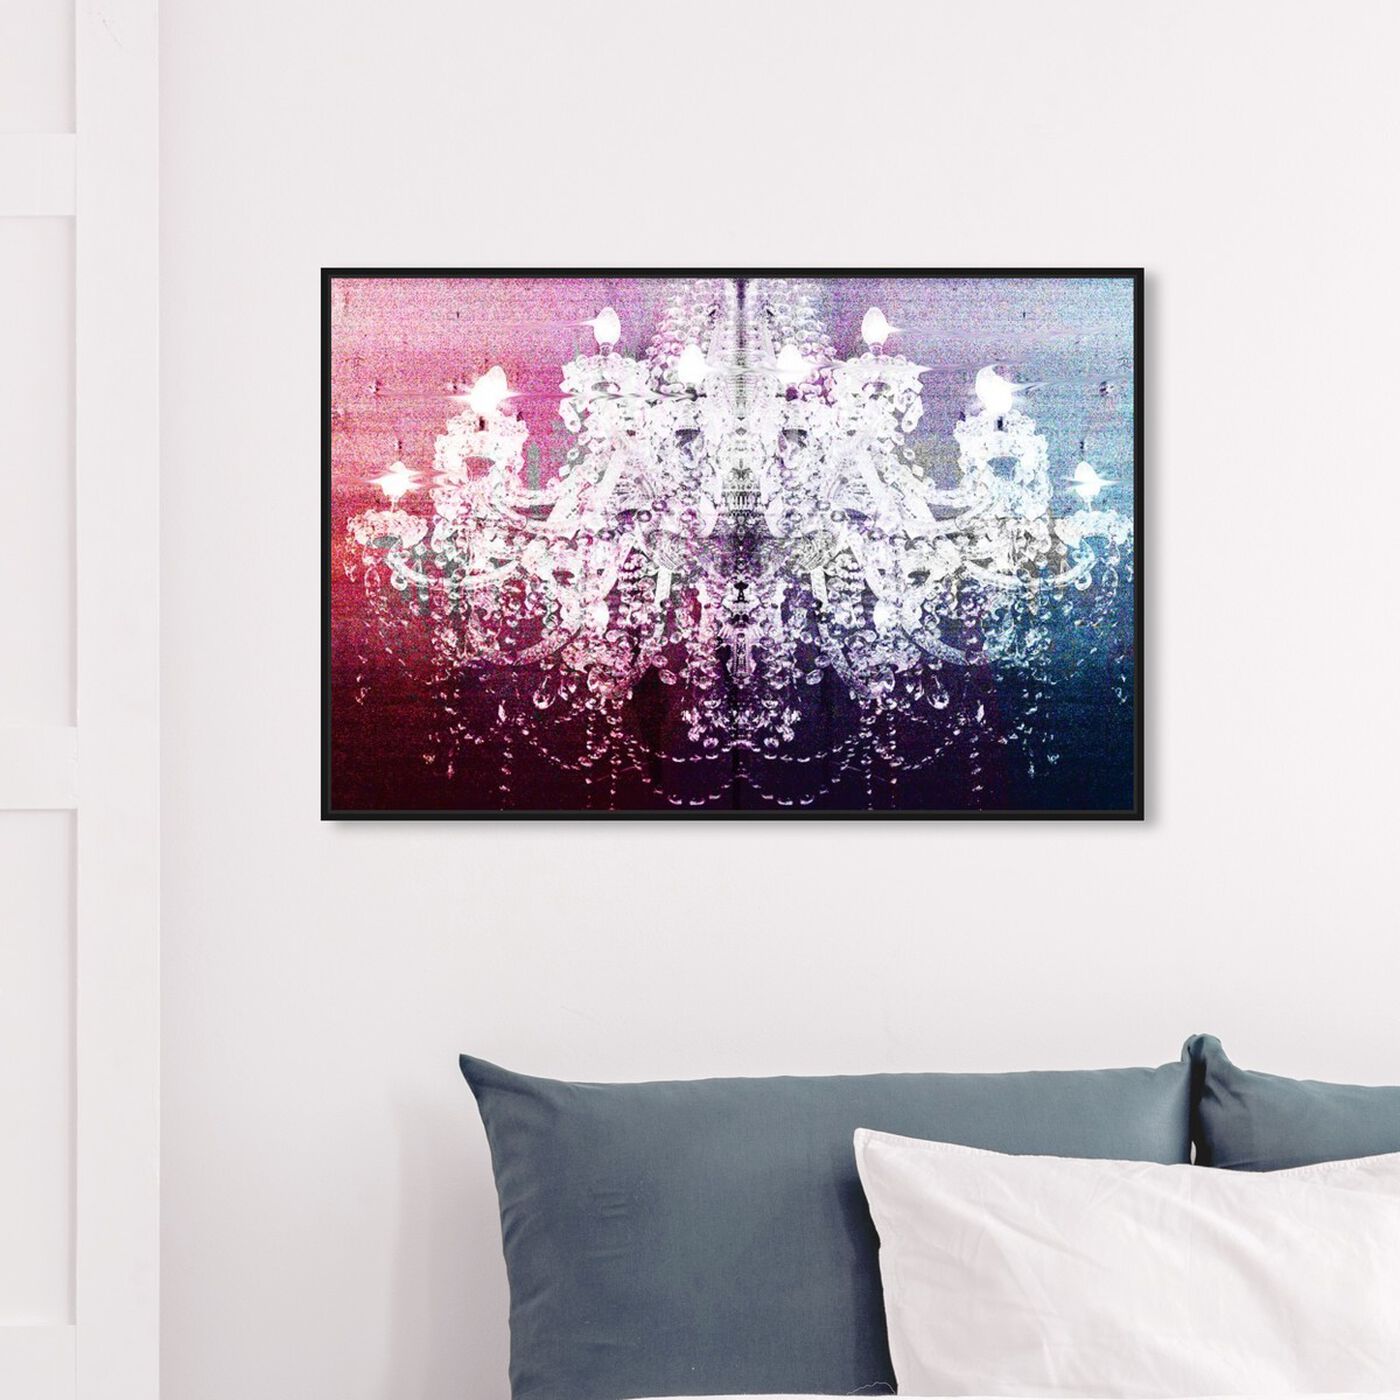 Hanging view of Heart of Glass - Fab featuring fashion and glam and chandeliers art.